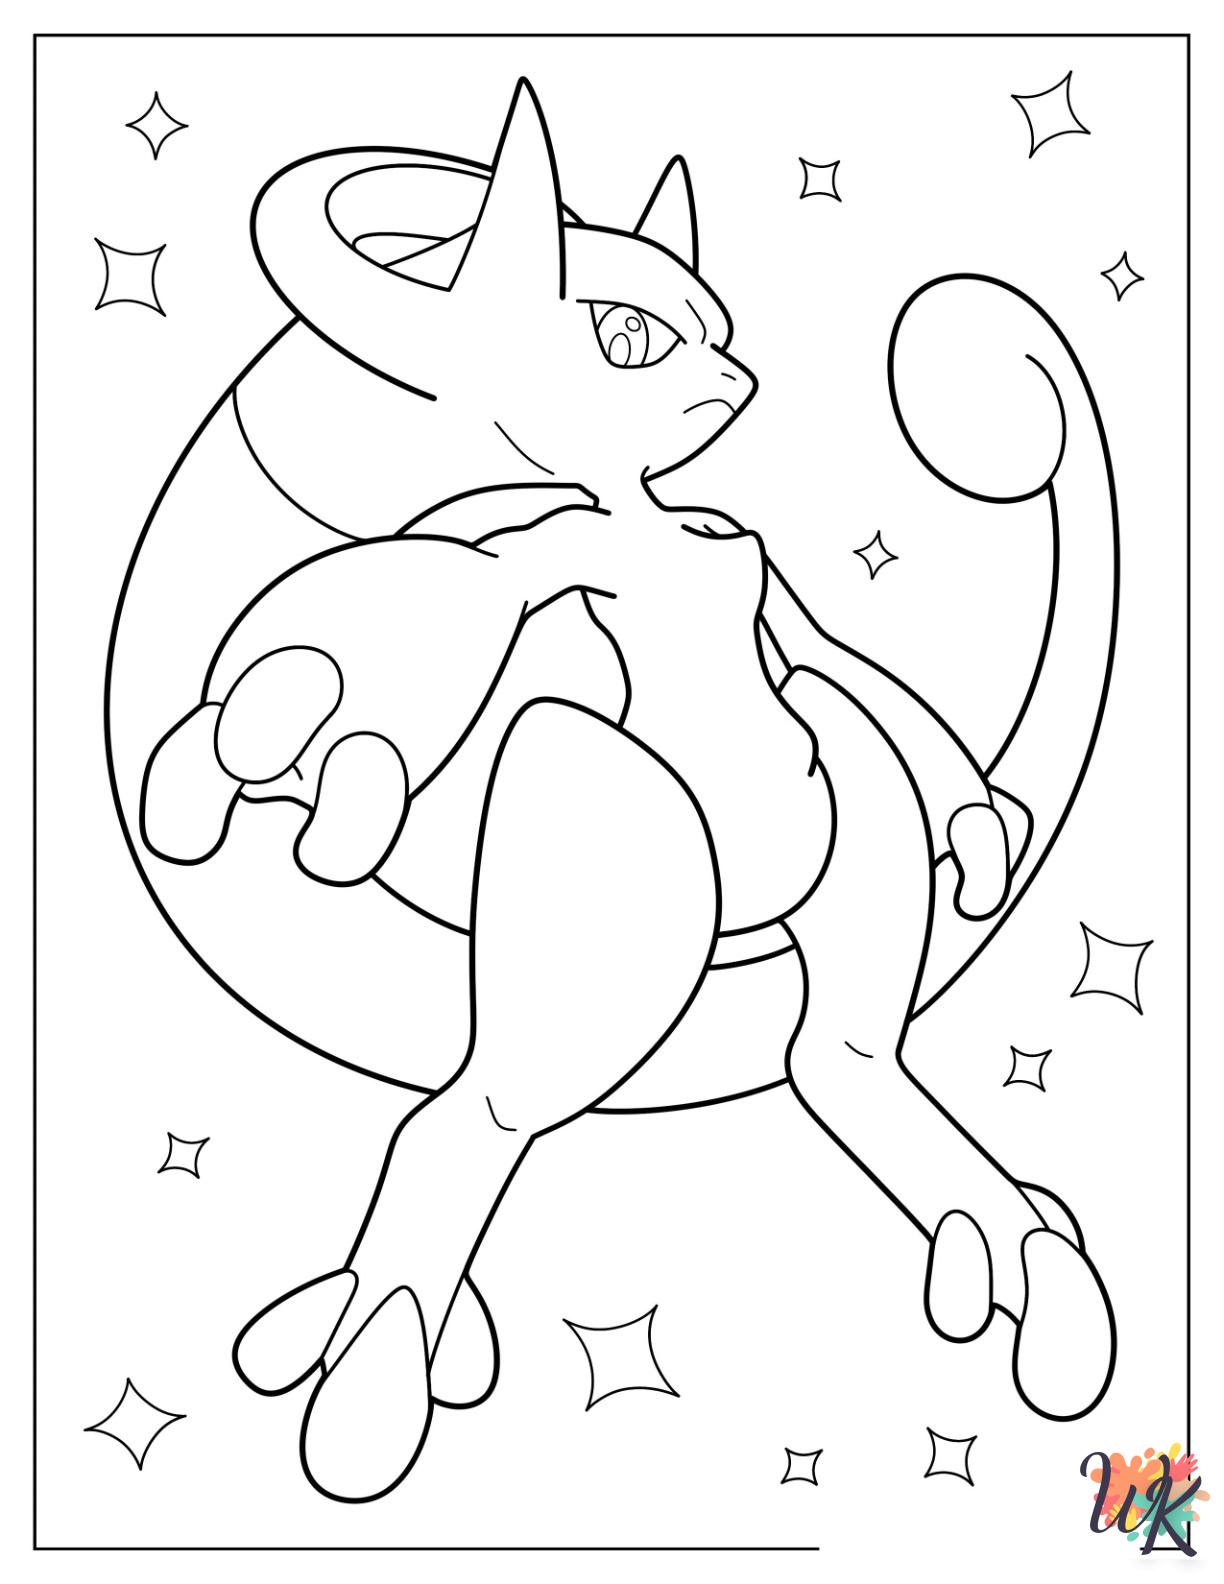 Mewtwo coloring pages for adults pdf